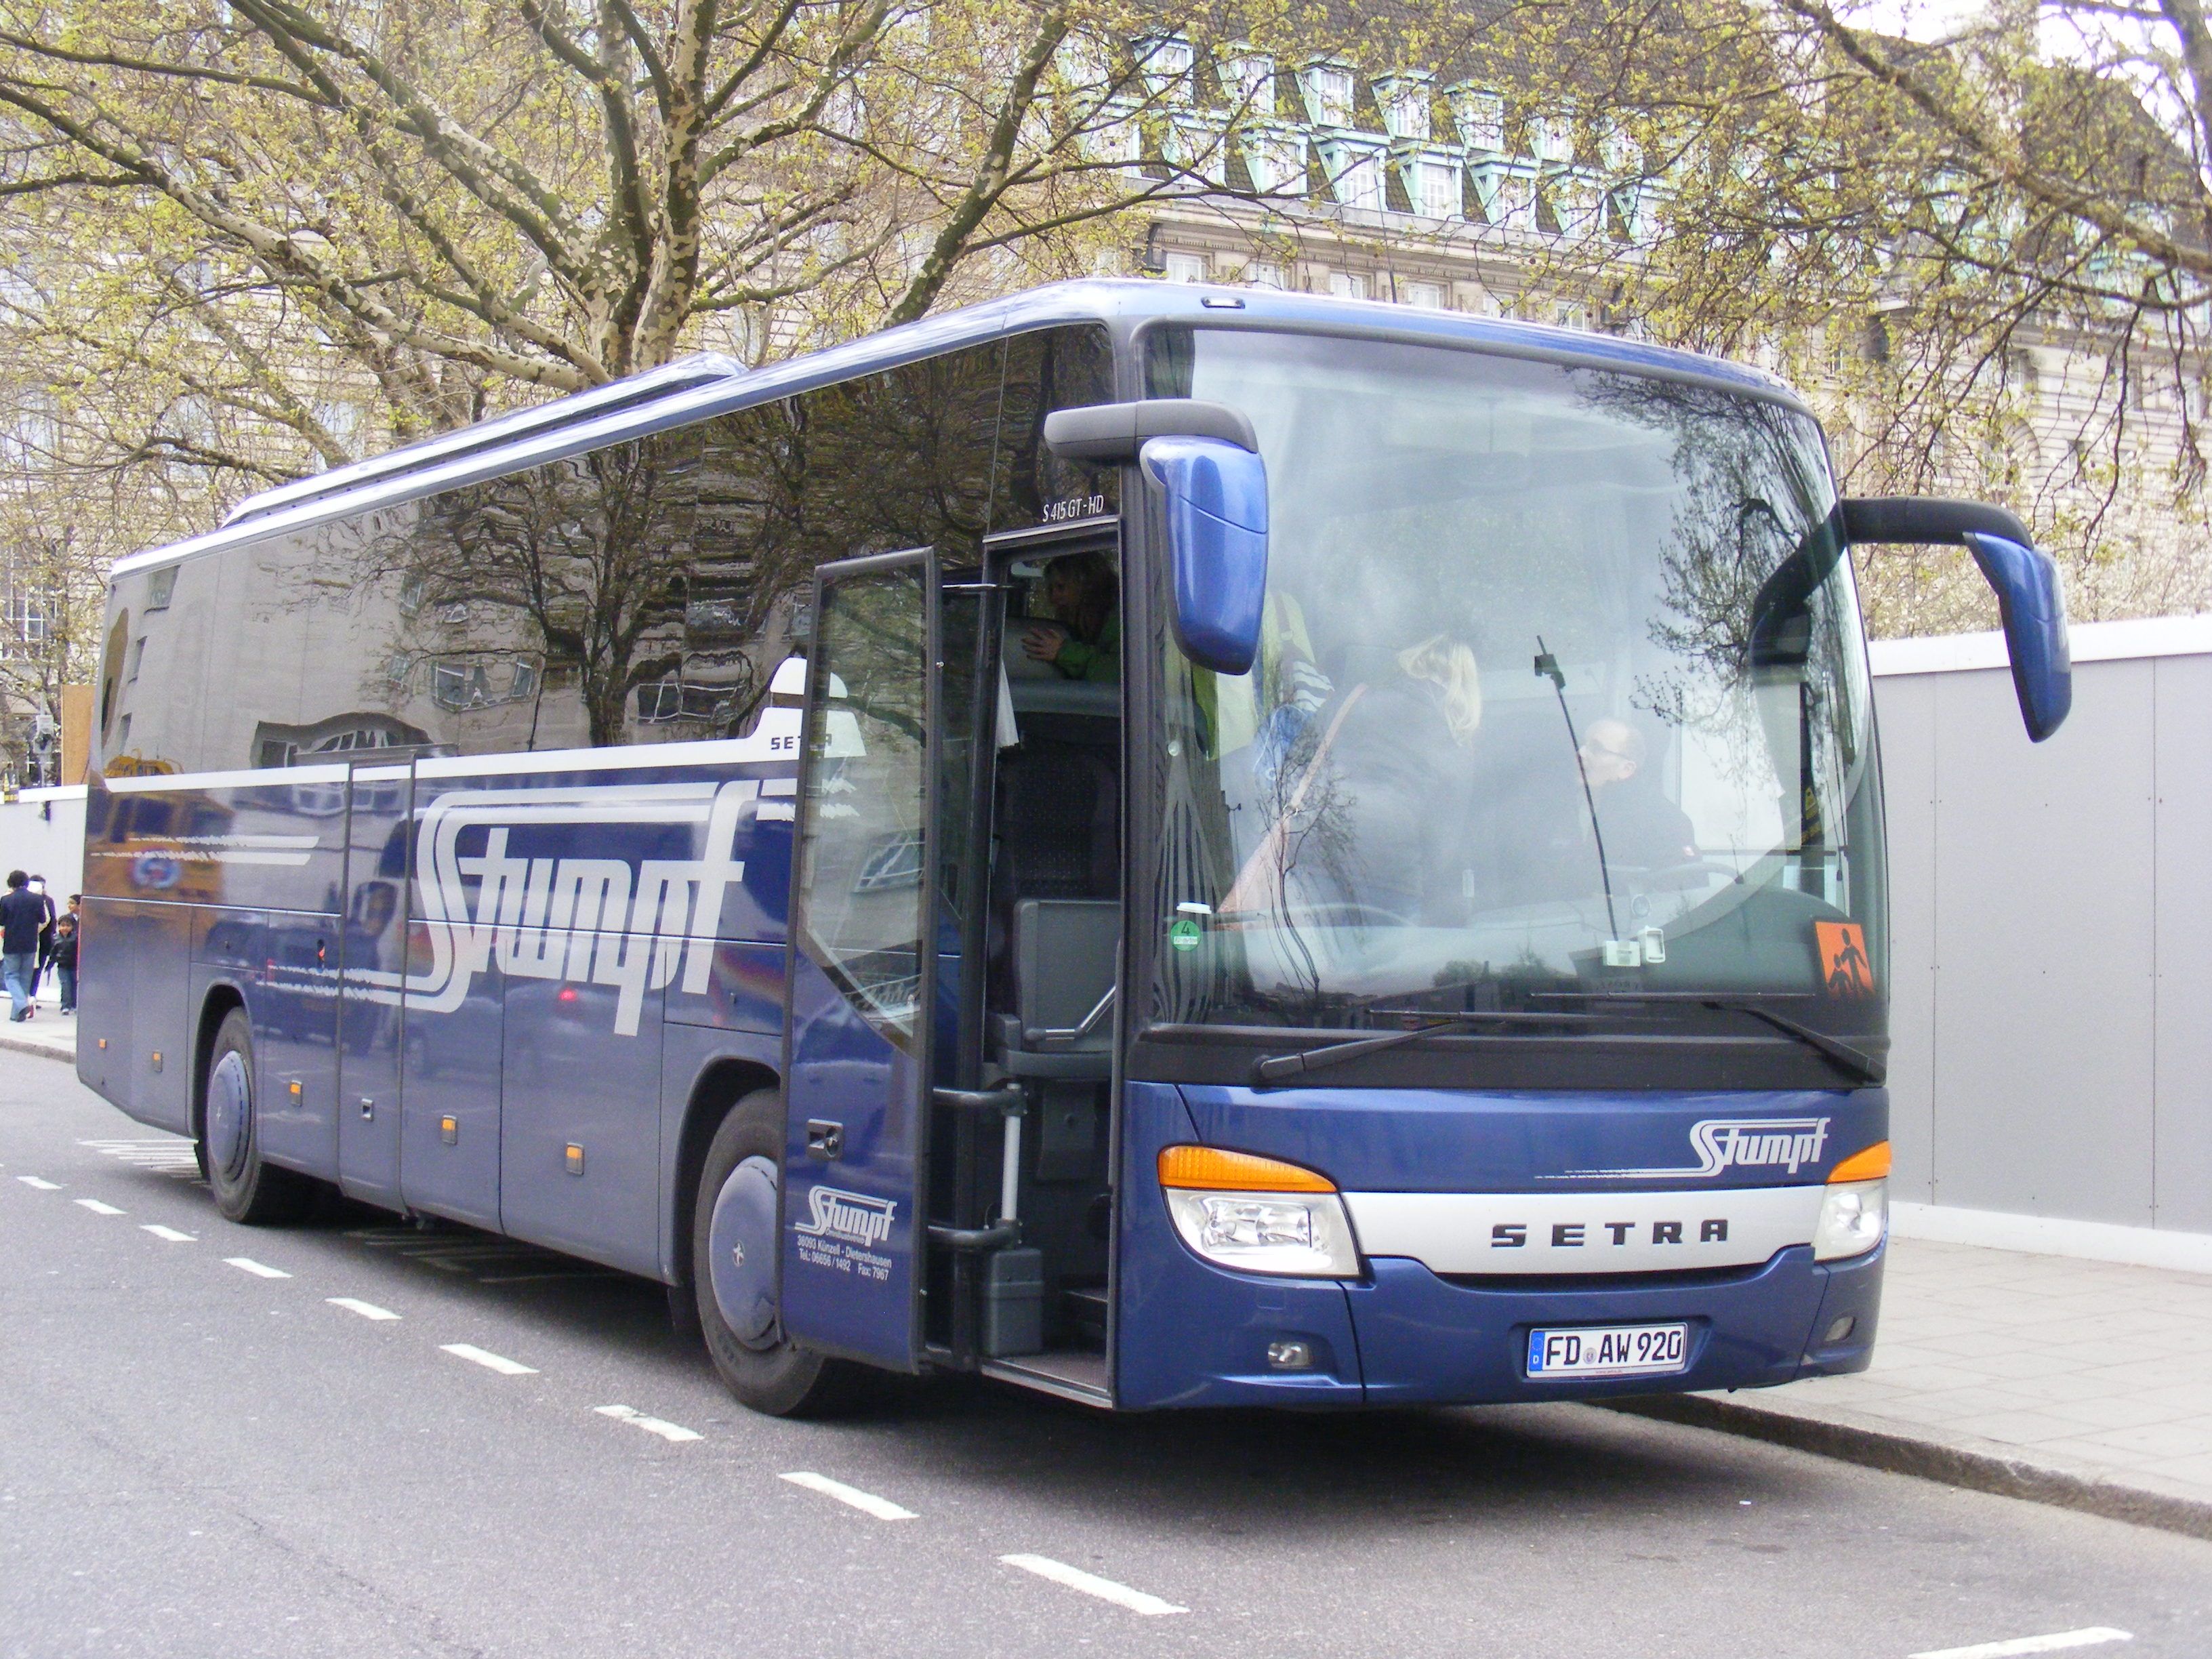 FD-AW 920 Setra S415 GT-HD, Stumpf, | Flickr - Photo Sharing!